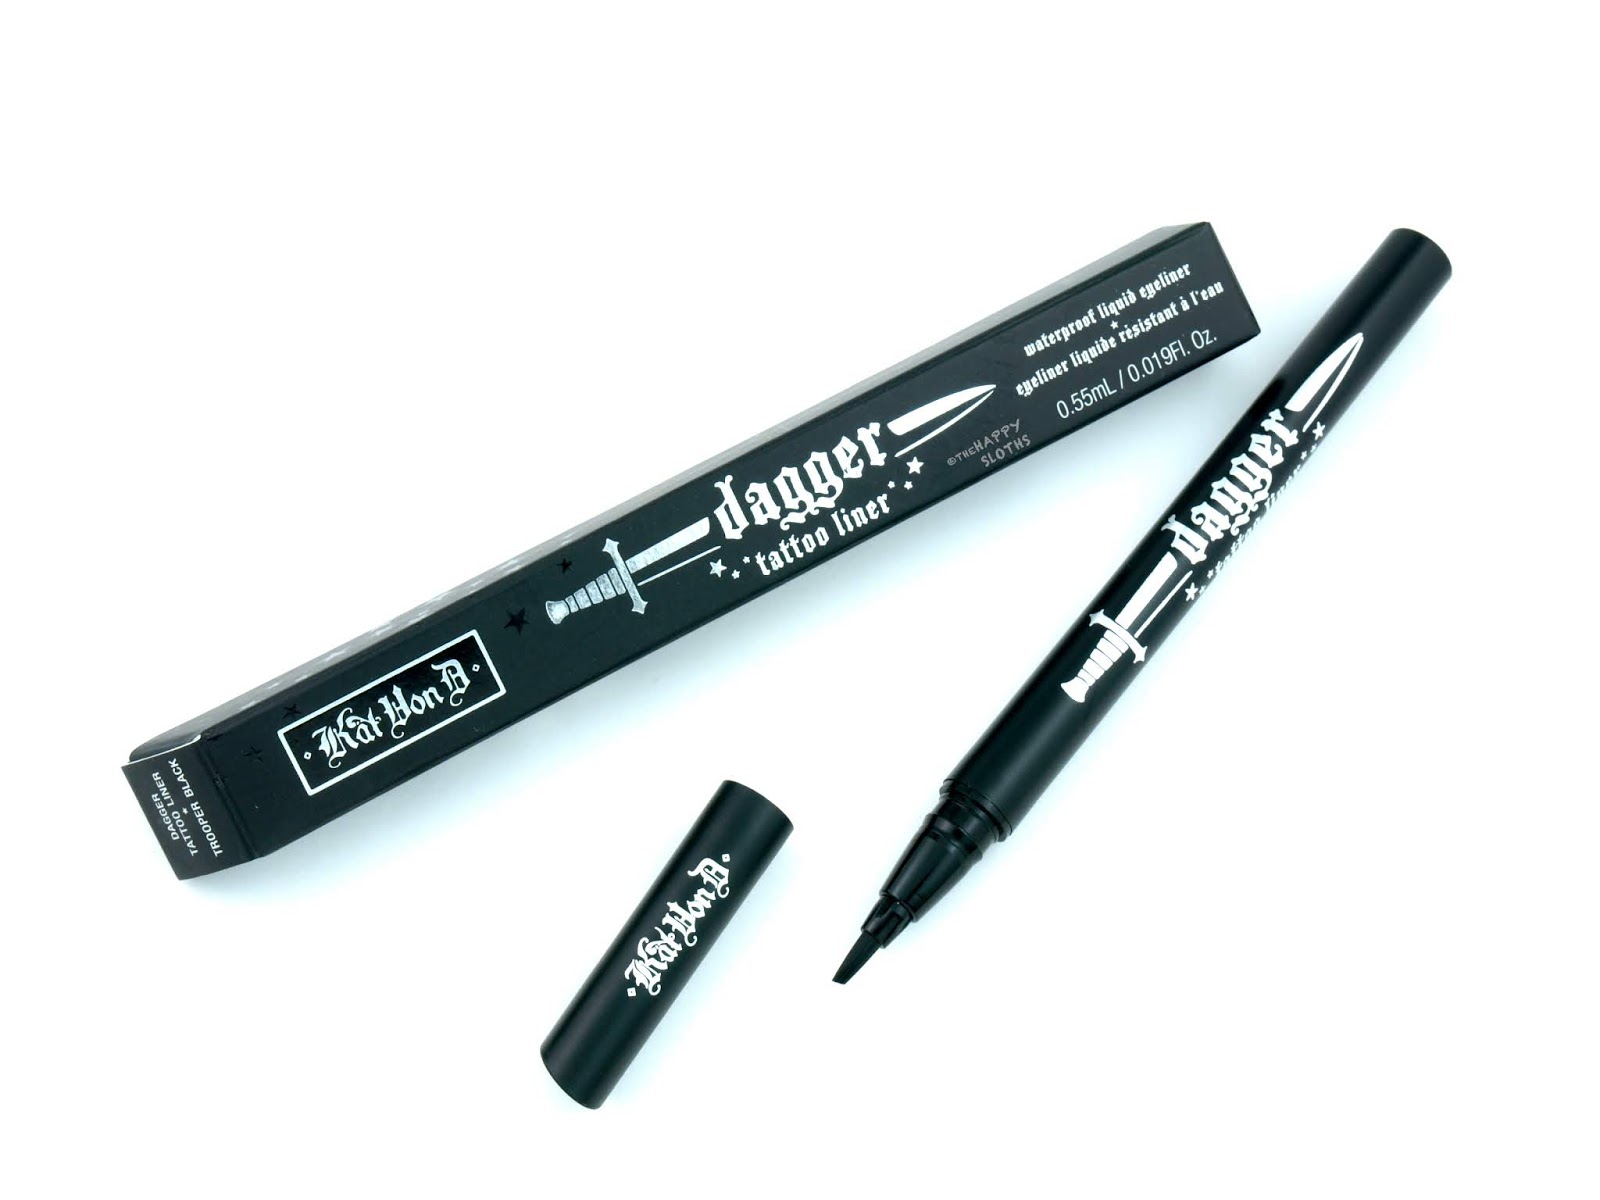 Kat Von D | Dagger Tattoo Liner: Review and Swatches